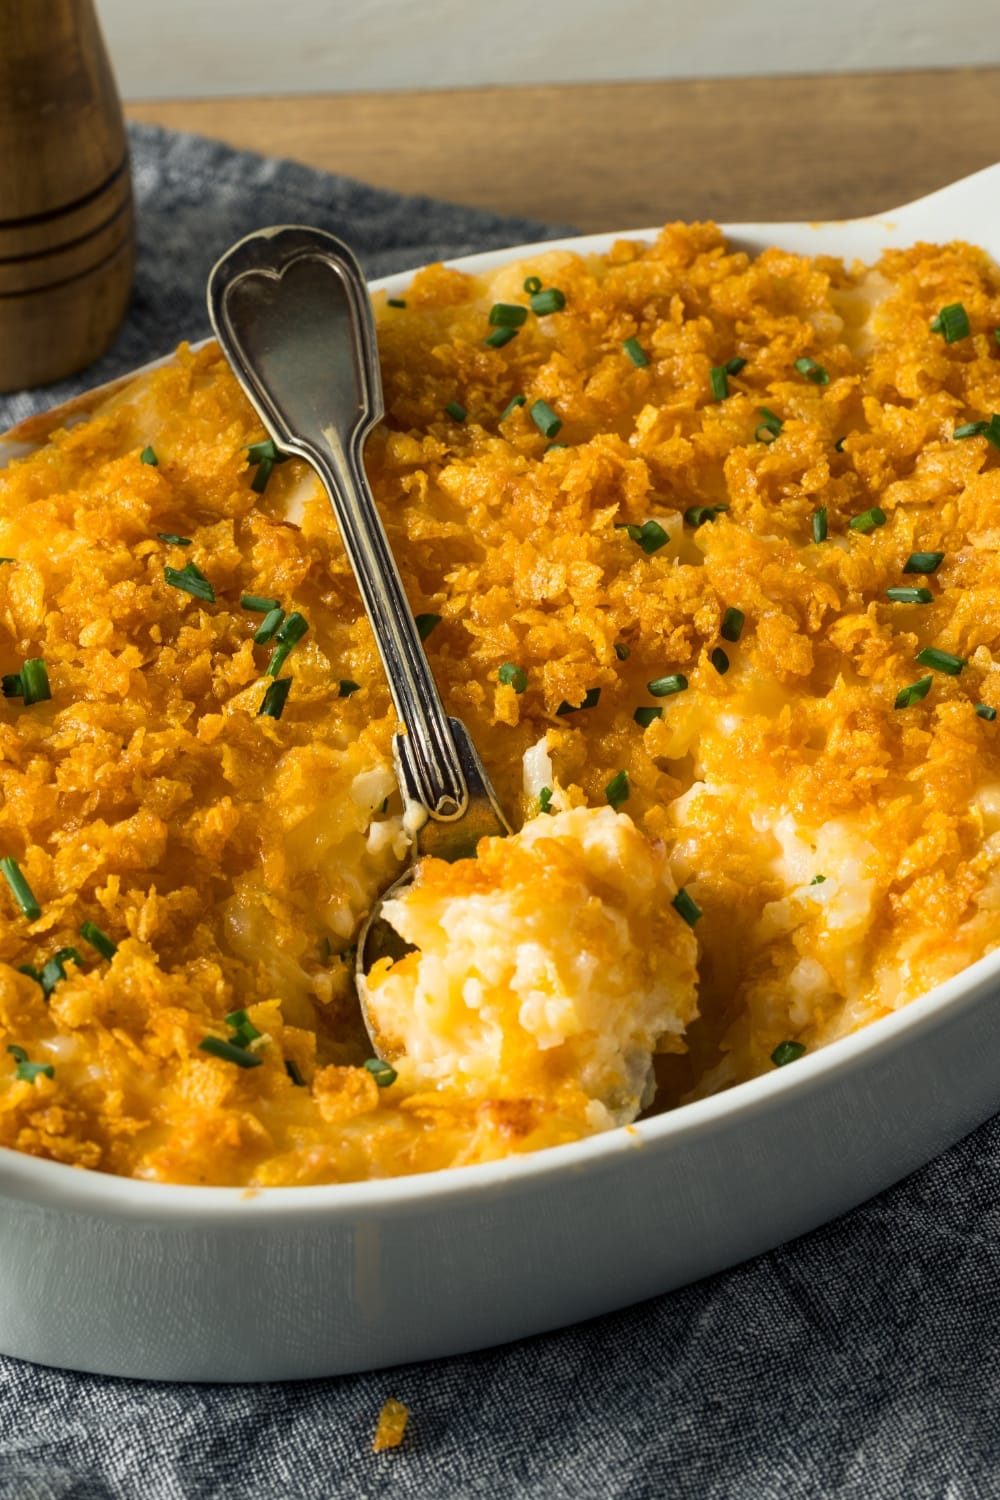 Homemade Funeral Potatoes with Herbs